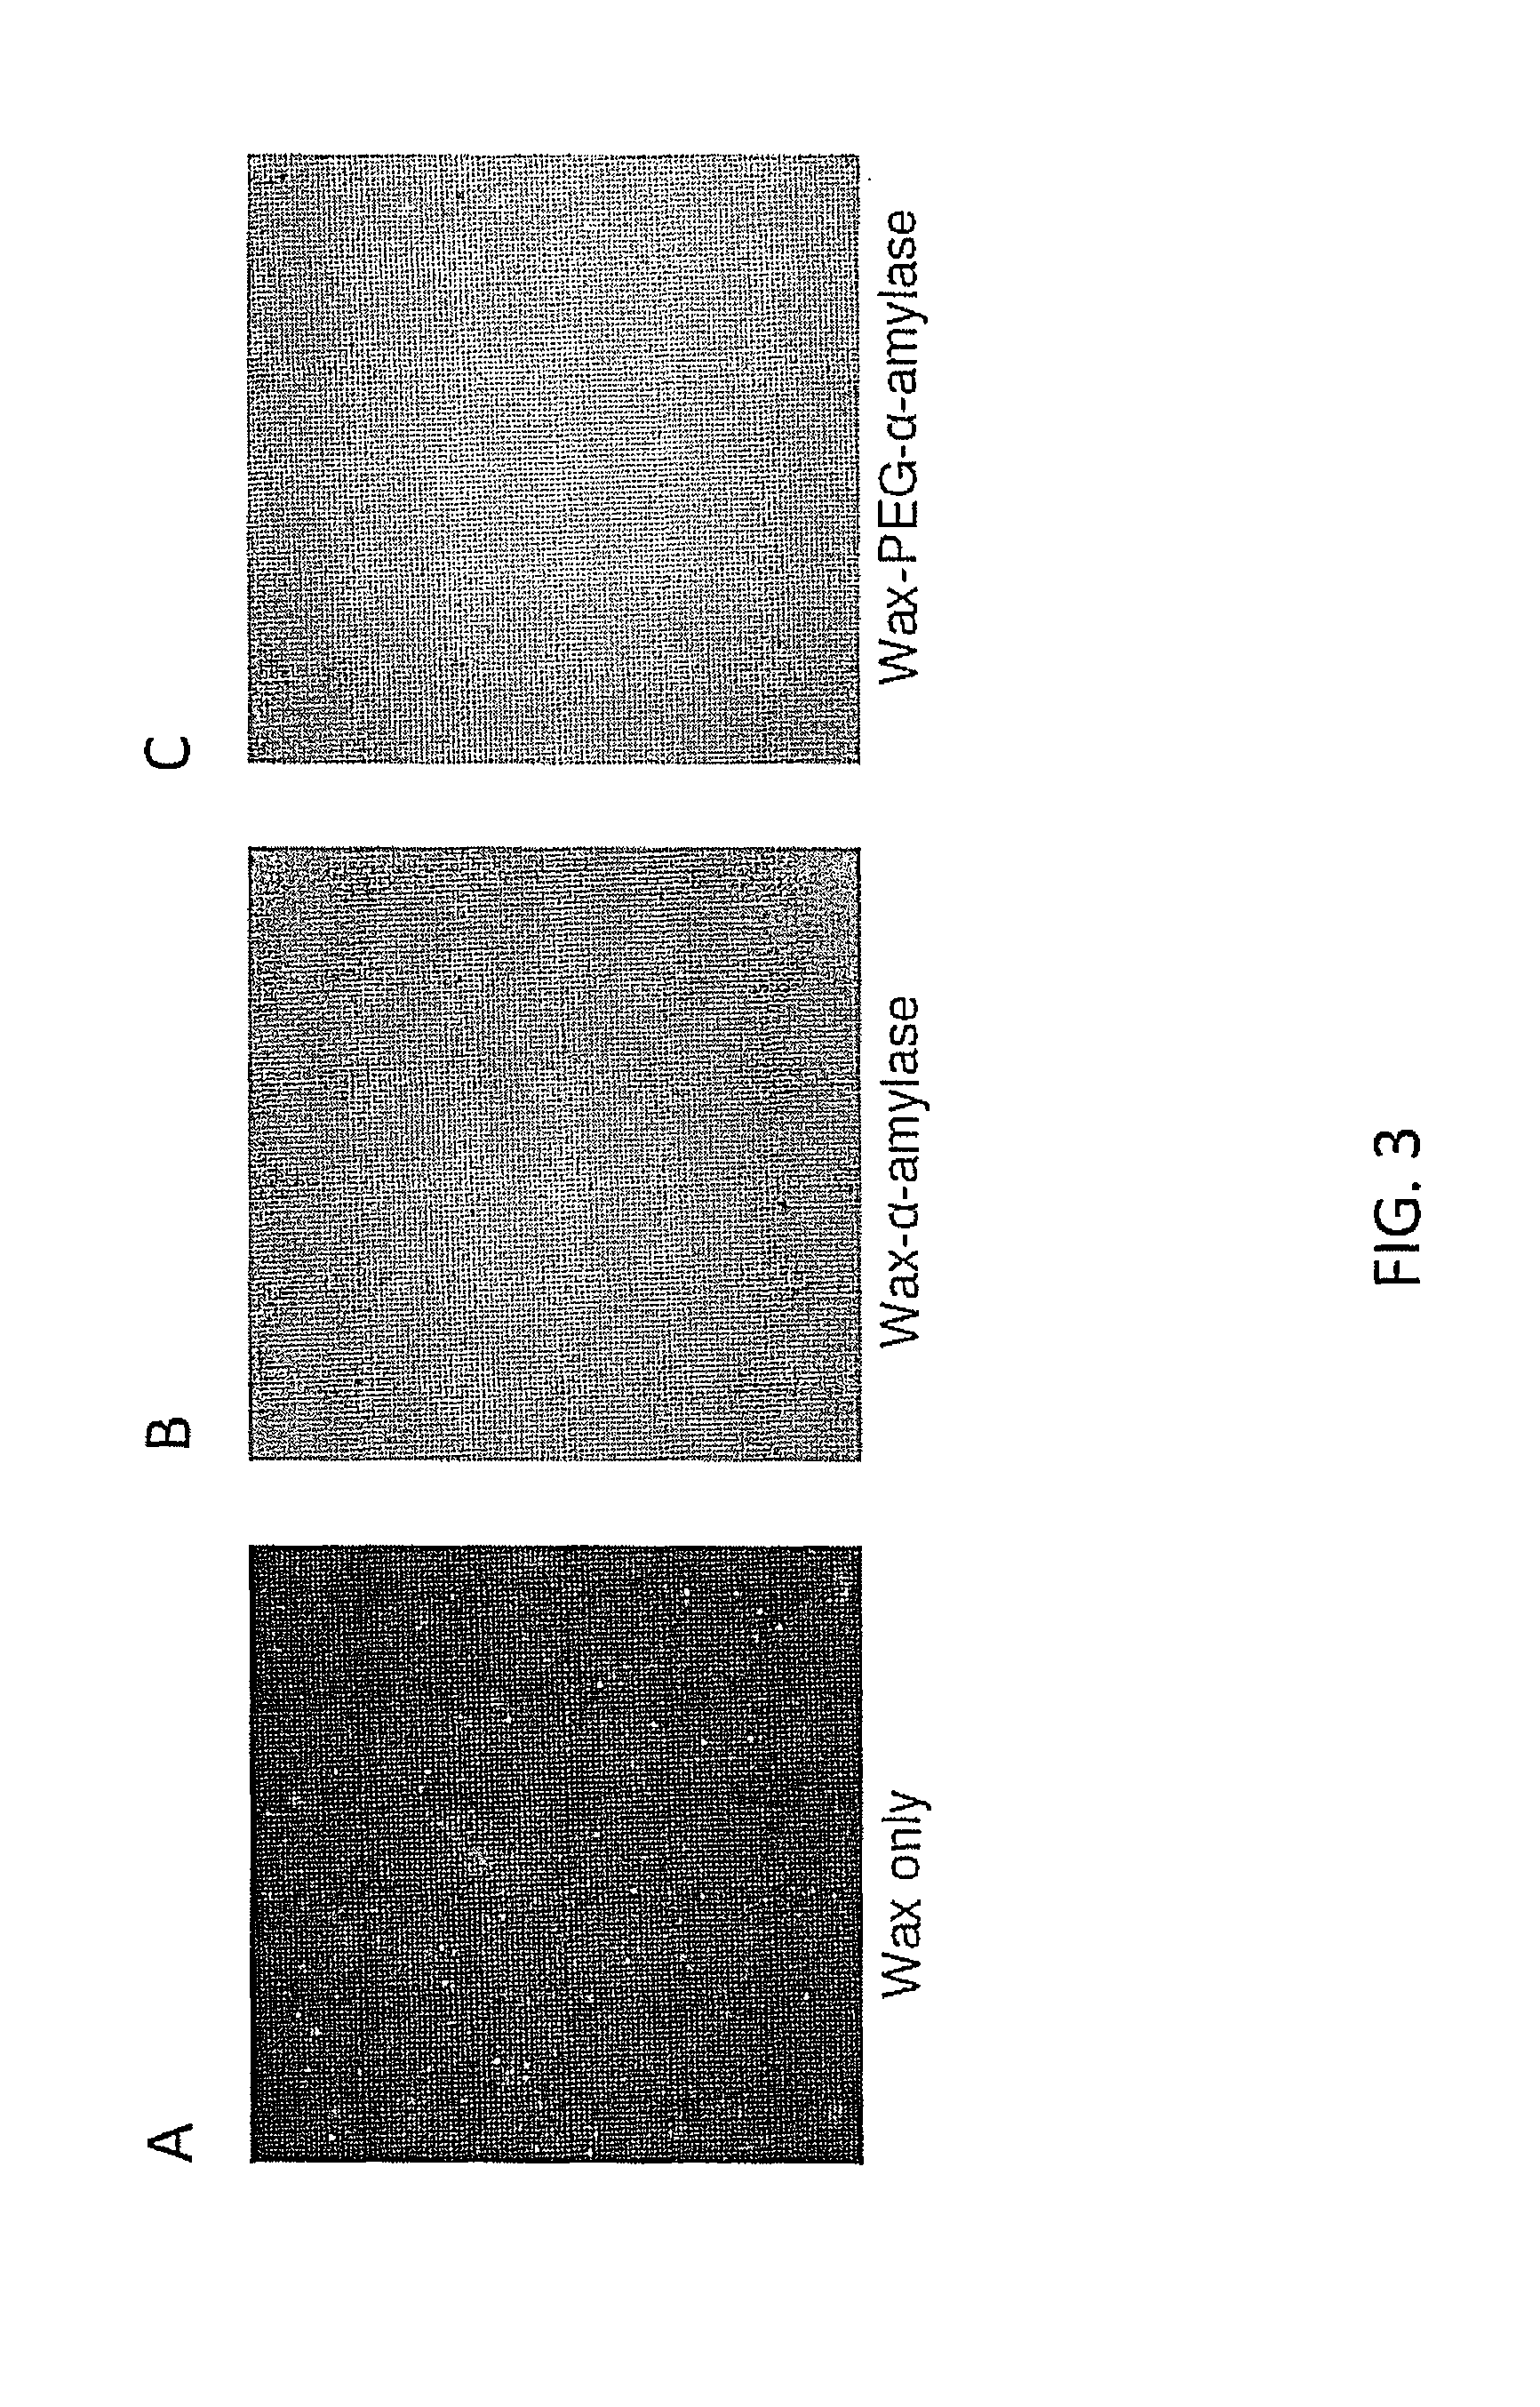 Coatings containing polymer modified enzyme for stable self-cleaning of organic stains